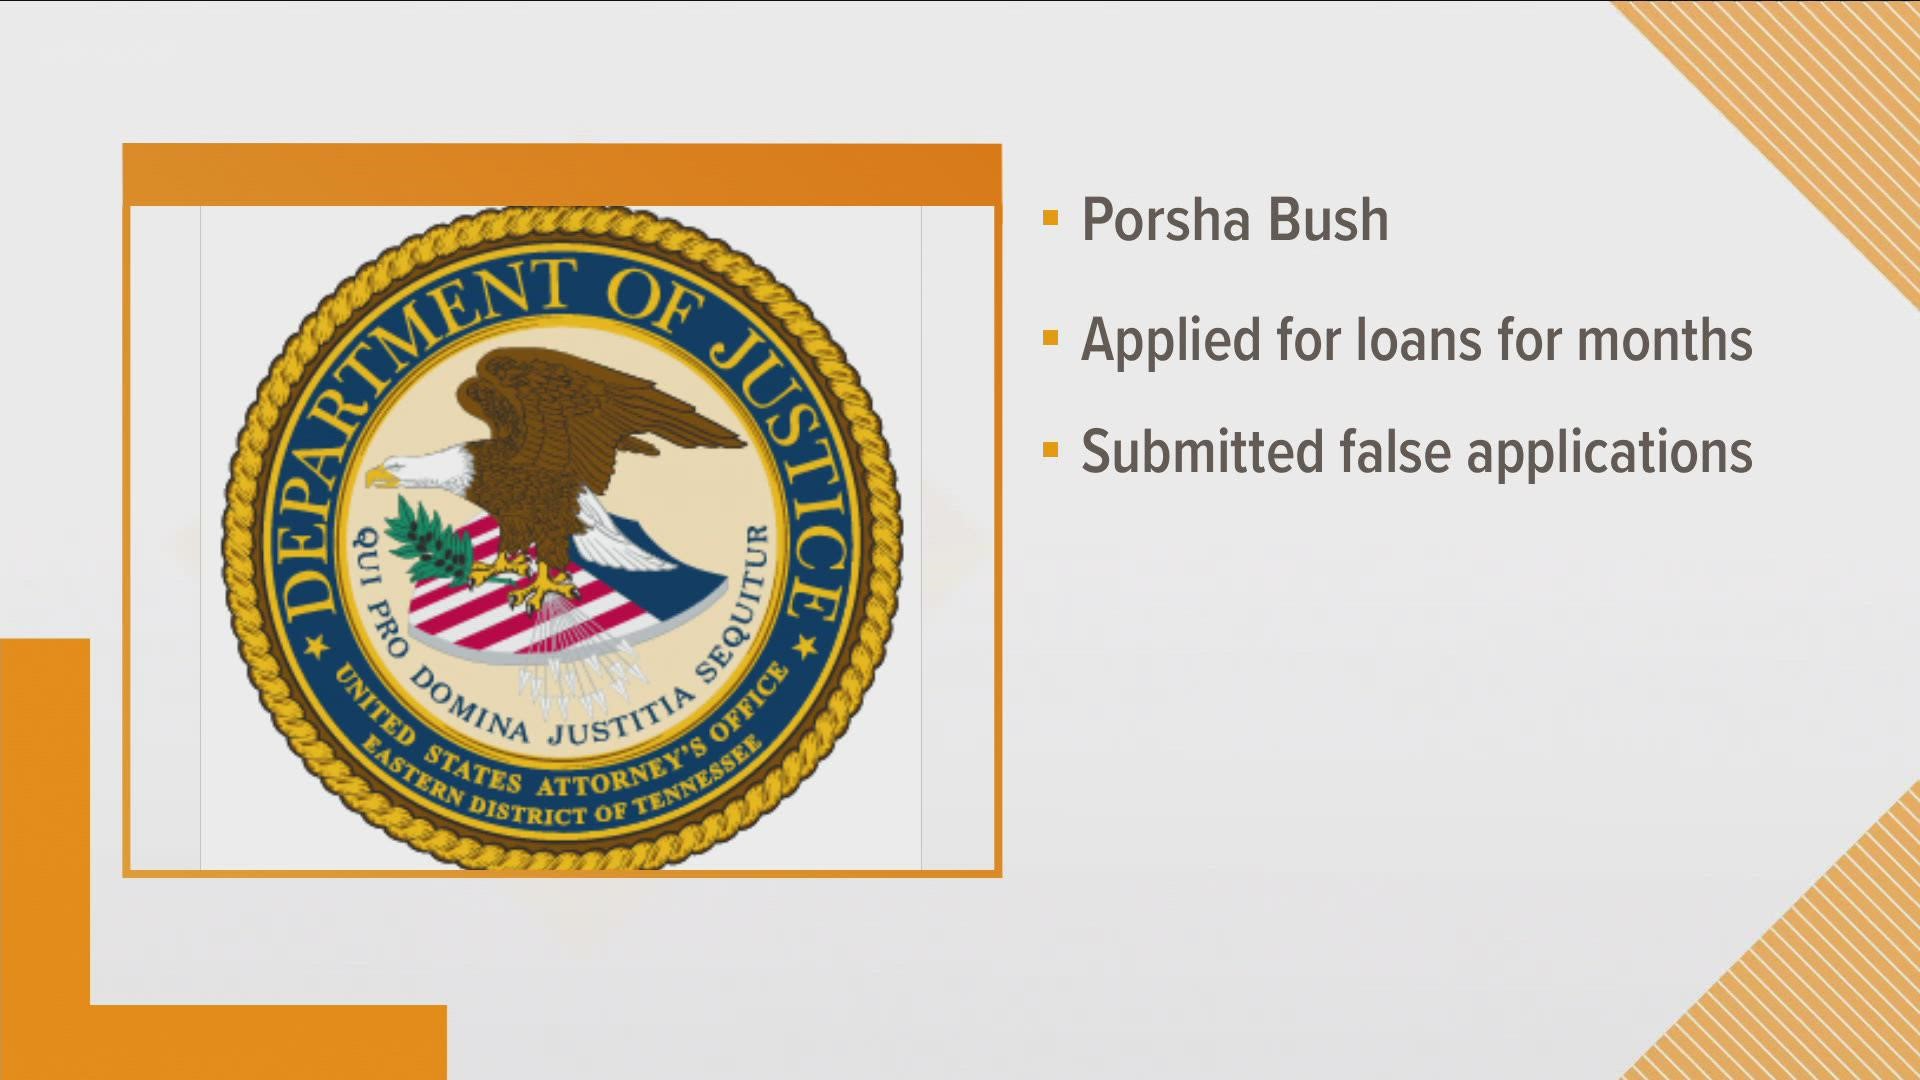 Porsha Bush applied for PPP loans totaling more than $500,000.